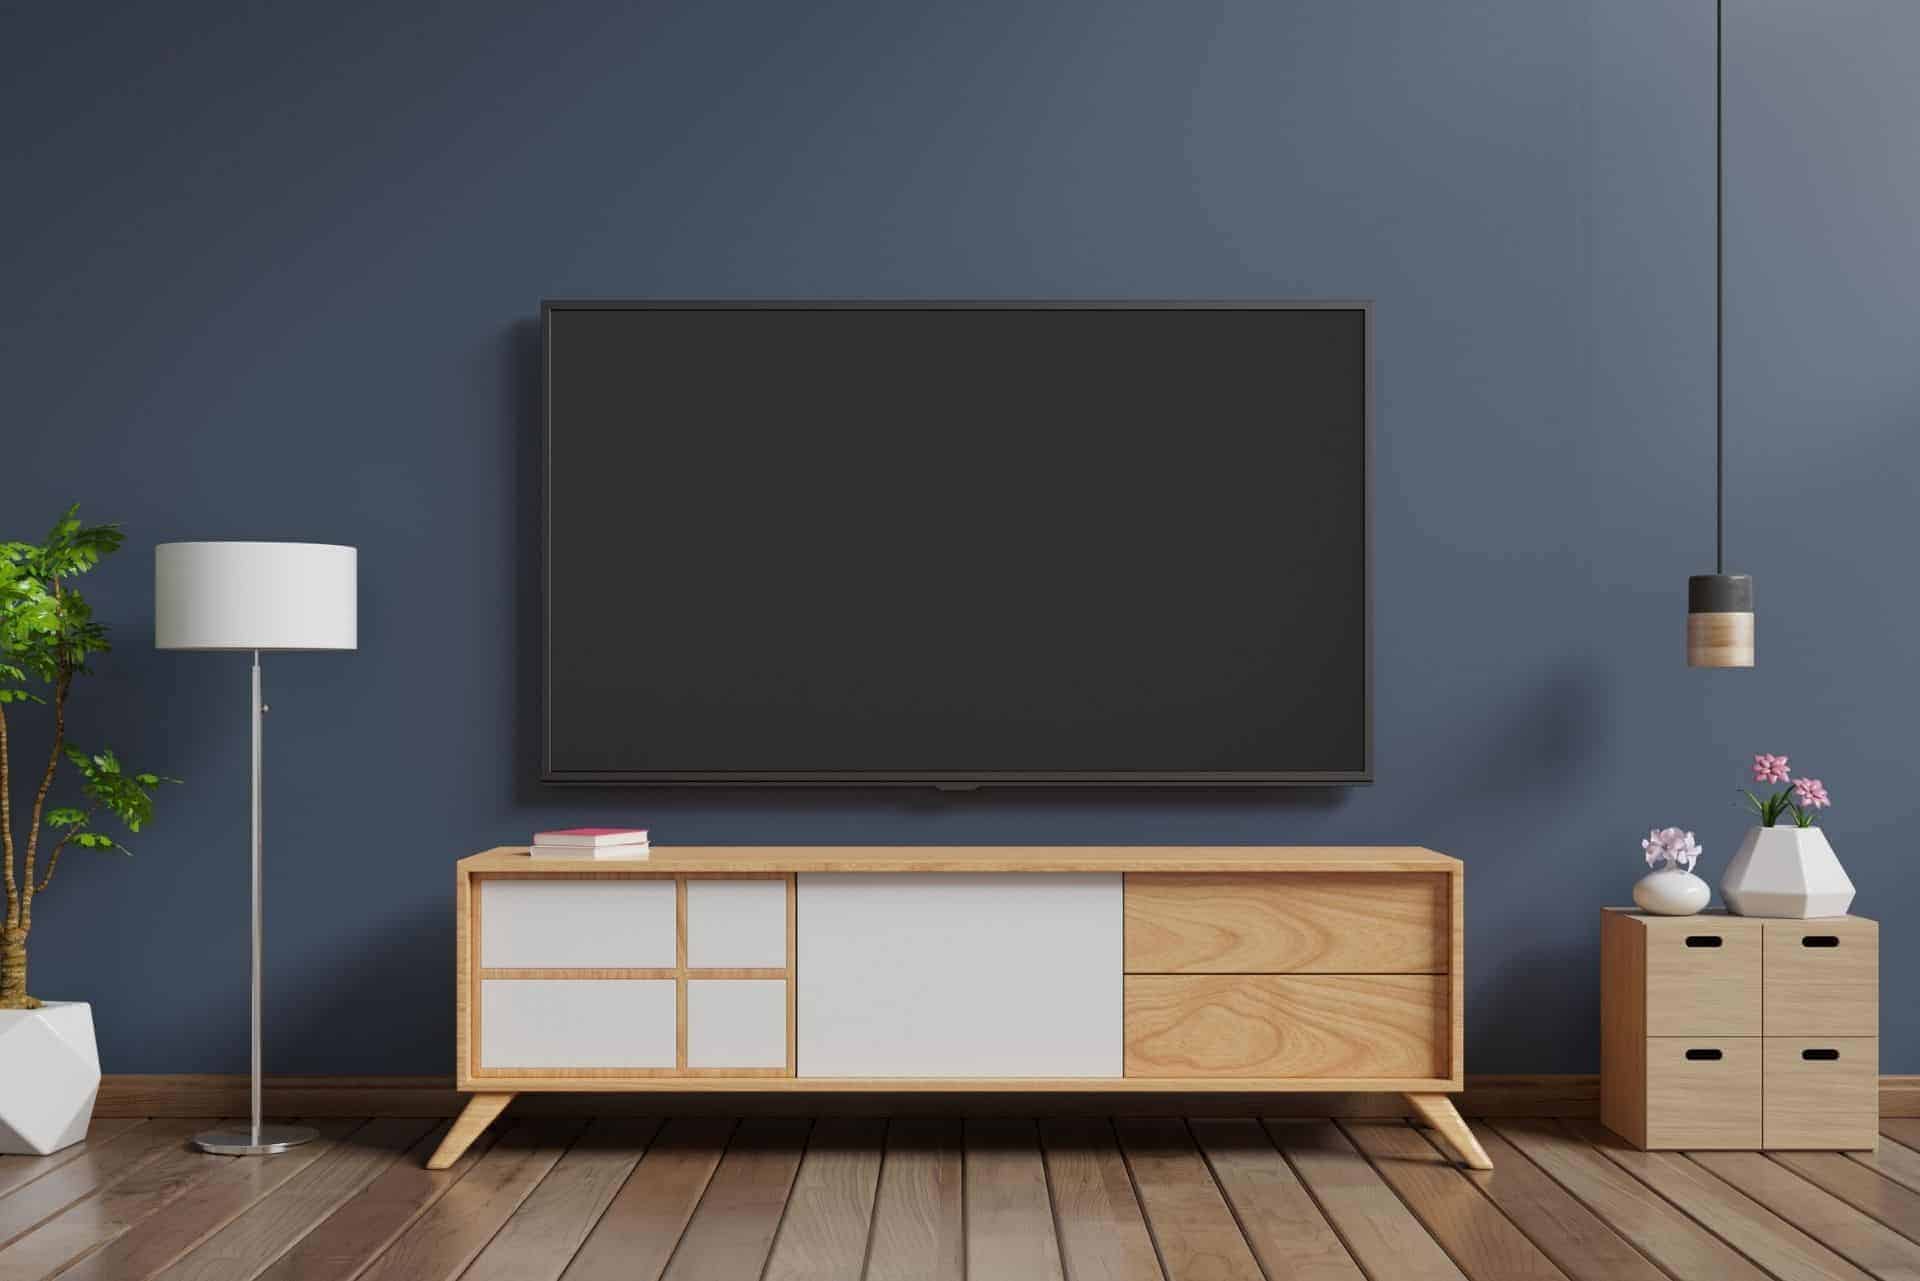 Tv hang on the wall,home designs,background shelves and books